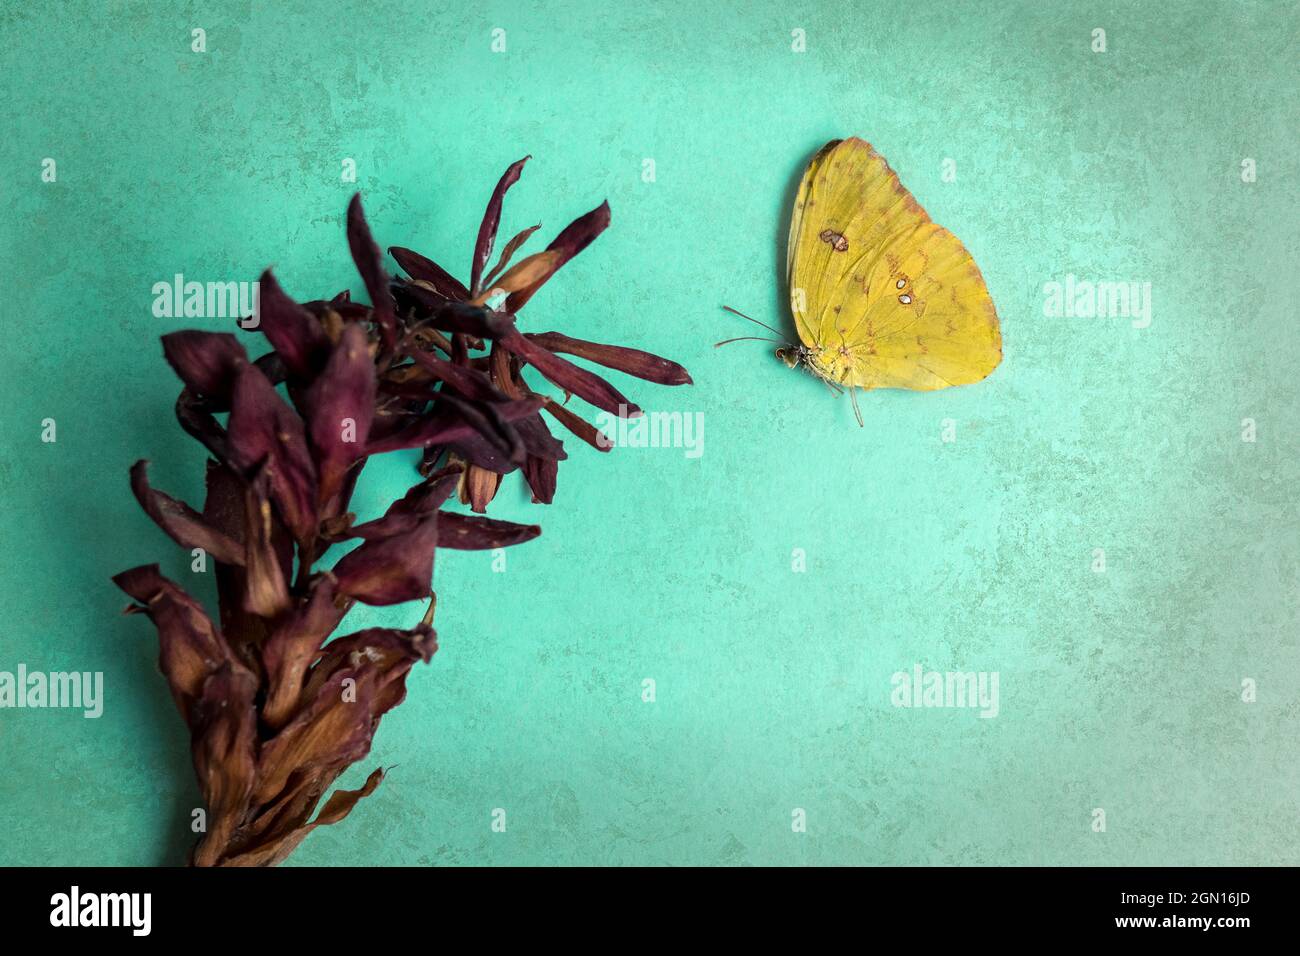 Dead yellow butterfly and dry flower of a wild plant upon a cartoon board representing a real-life garden, there is copy space in the picture Stock Photo